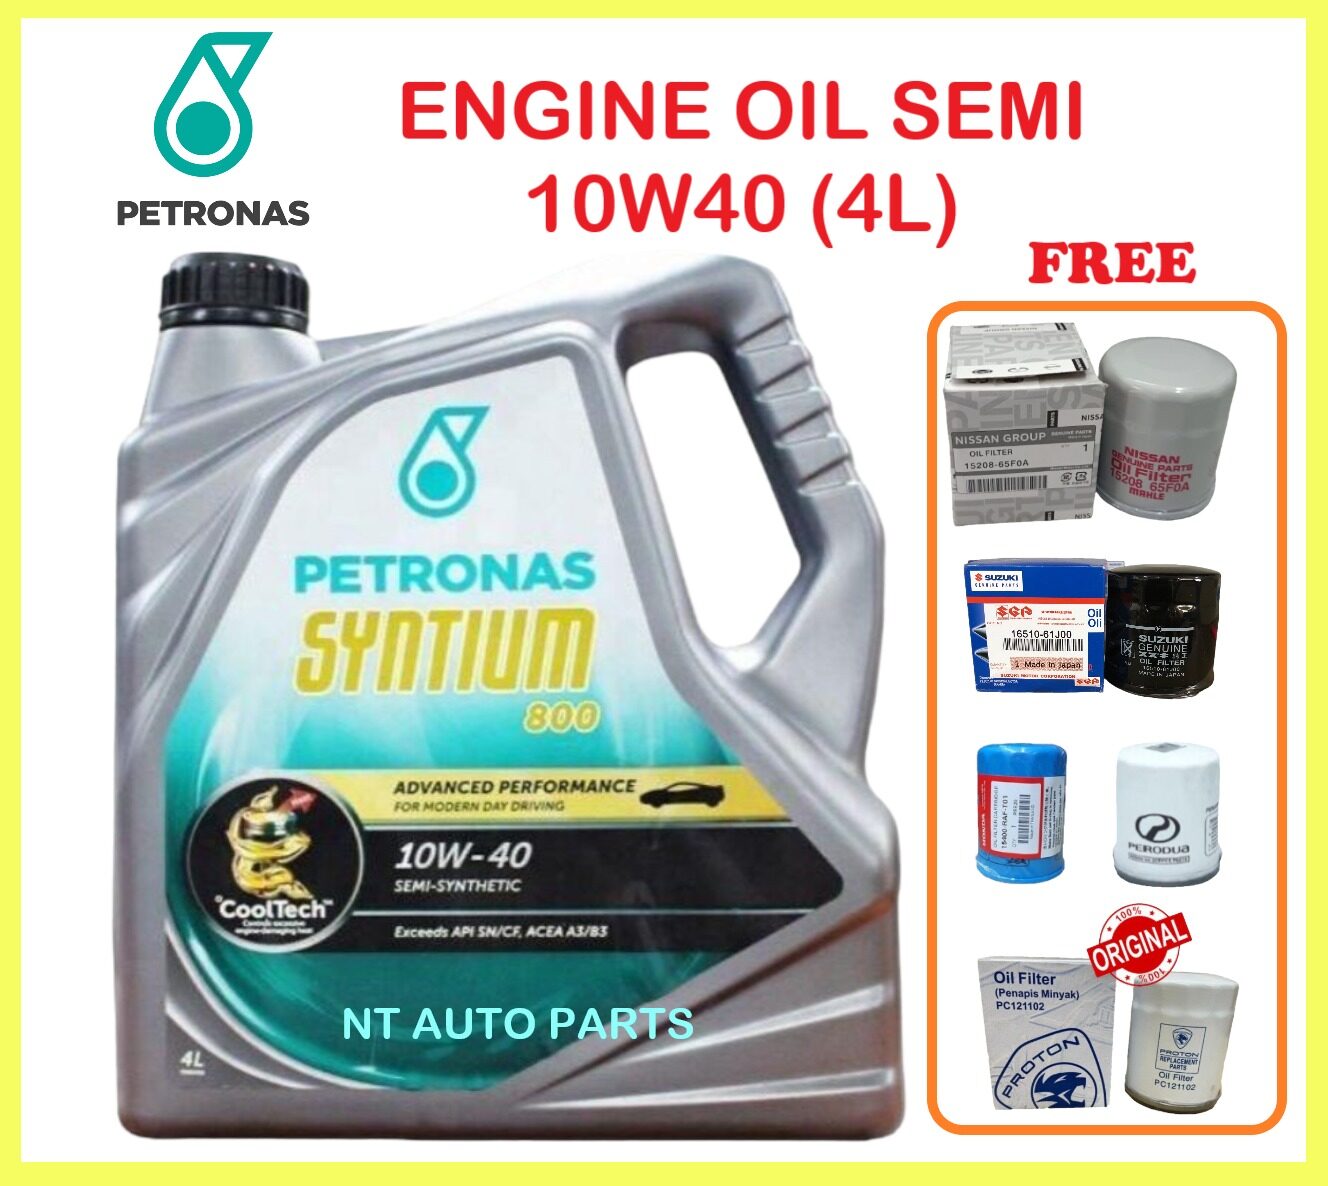 COMBO PACKAGE Petronas Syntium 800 10W40 10W-40 Semi Synthetic SN/CF Engine Oil 4L FOC Oil Filter